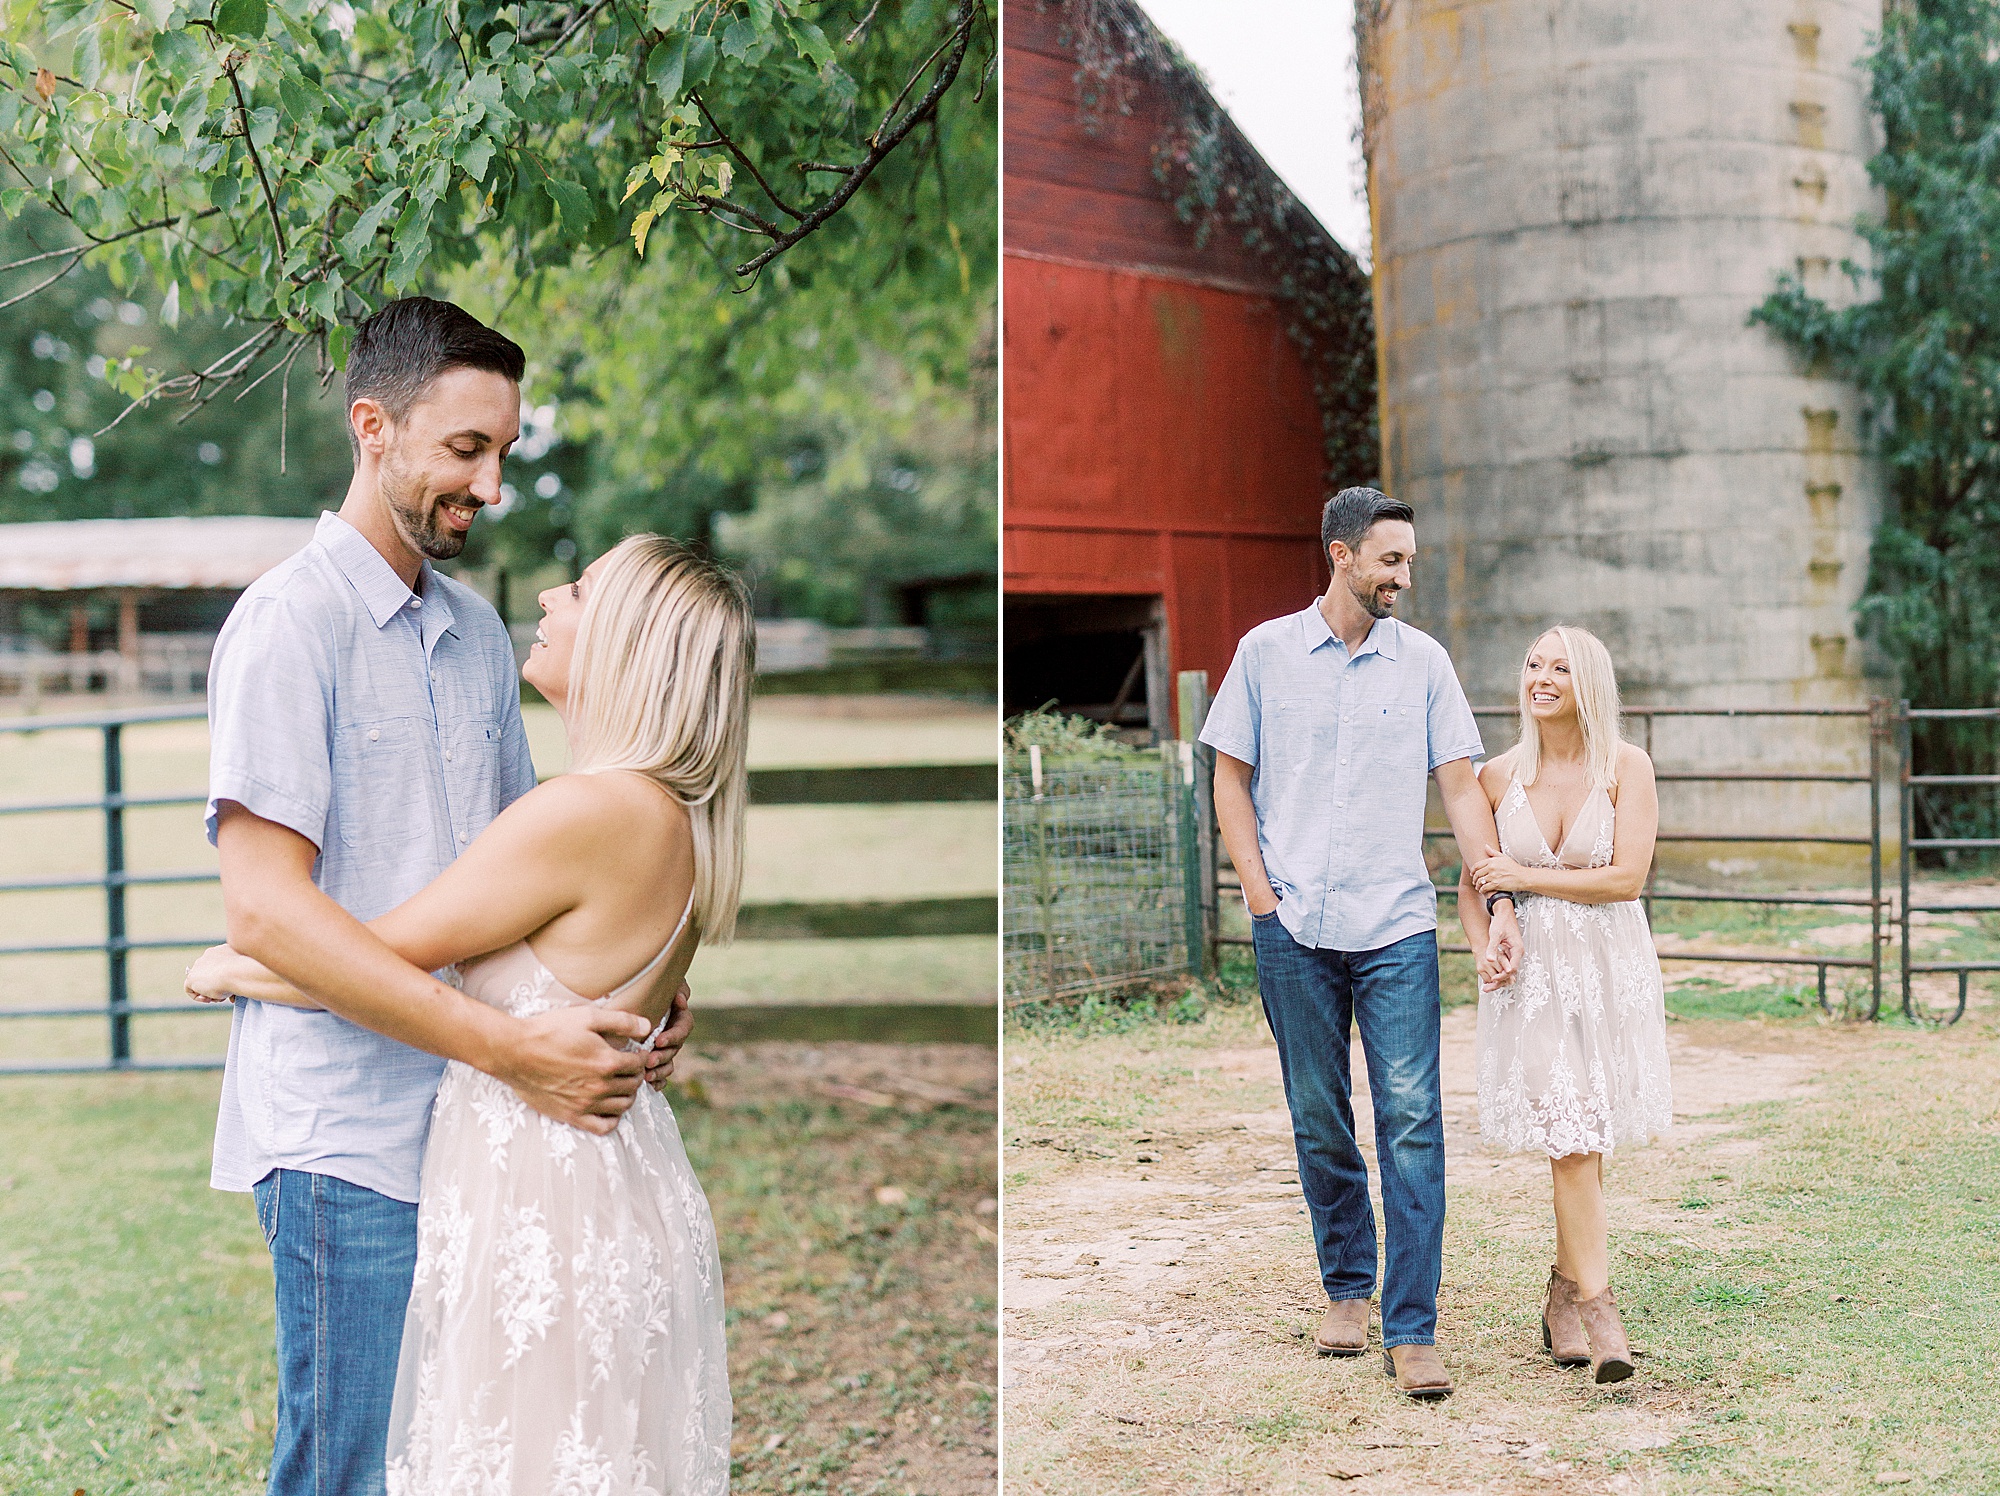 Hodges Family Farm engagement session for bride and groom